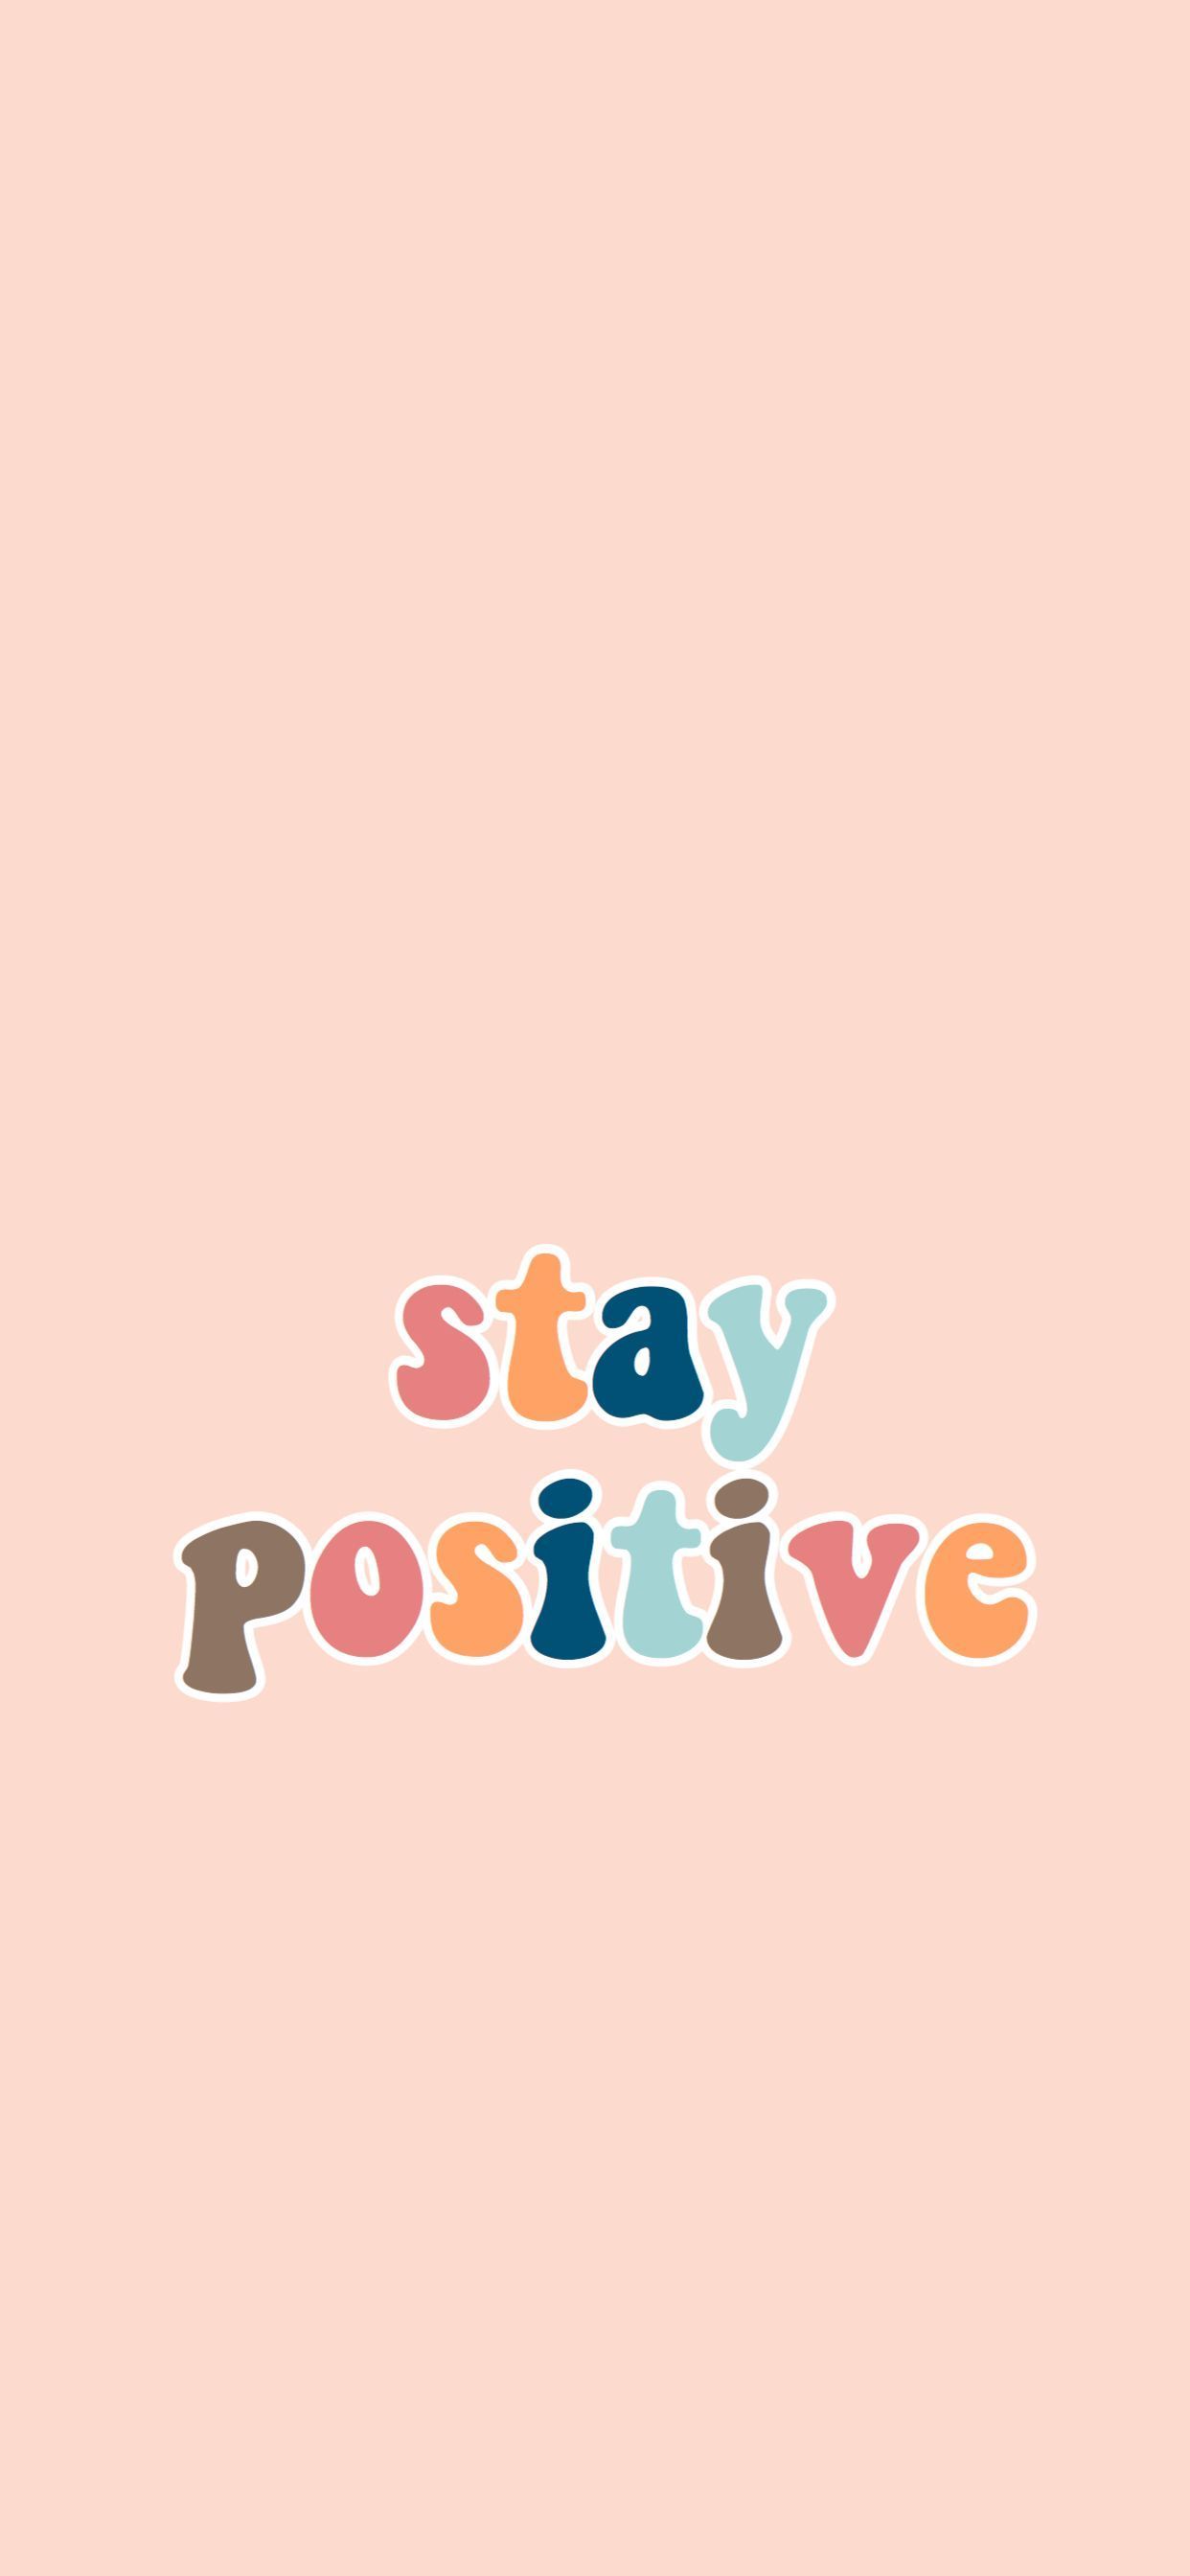 Aesthetic Positive Wallpaper Free Aesthetic Positive Background